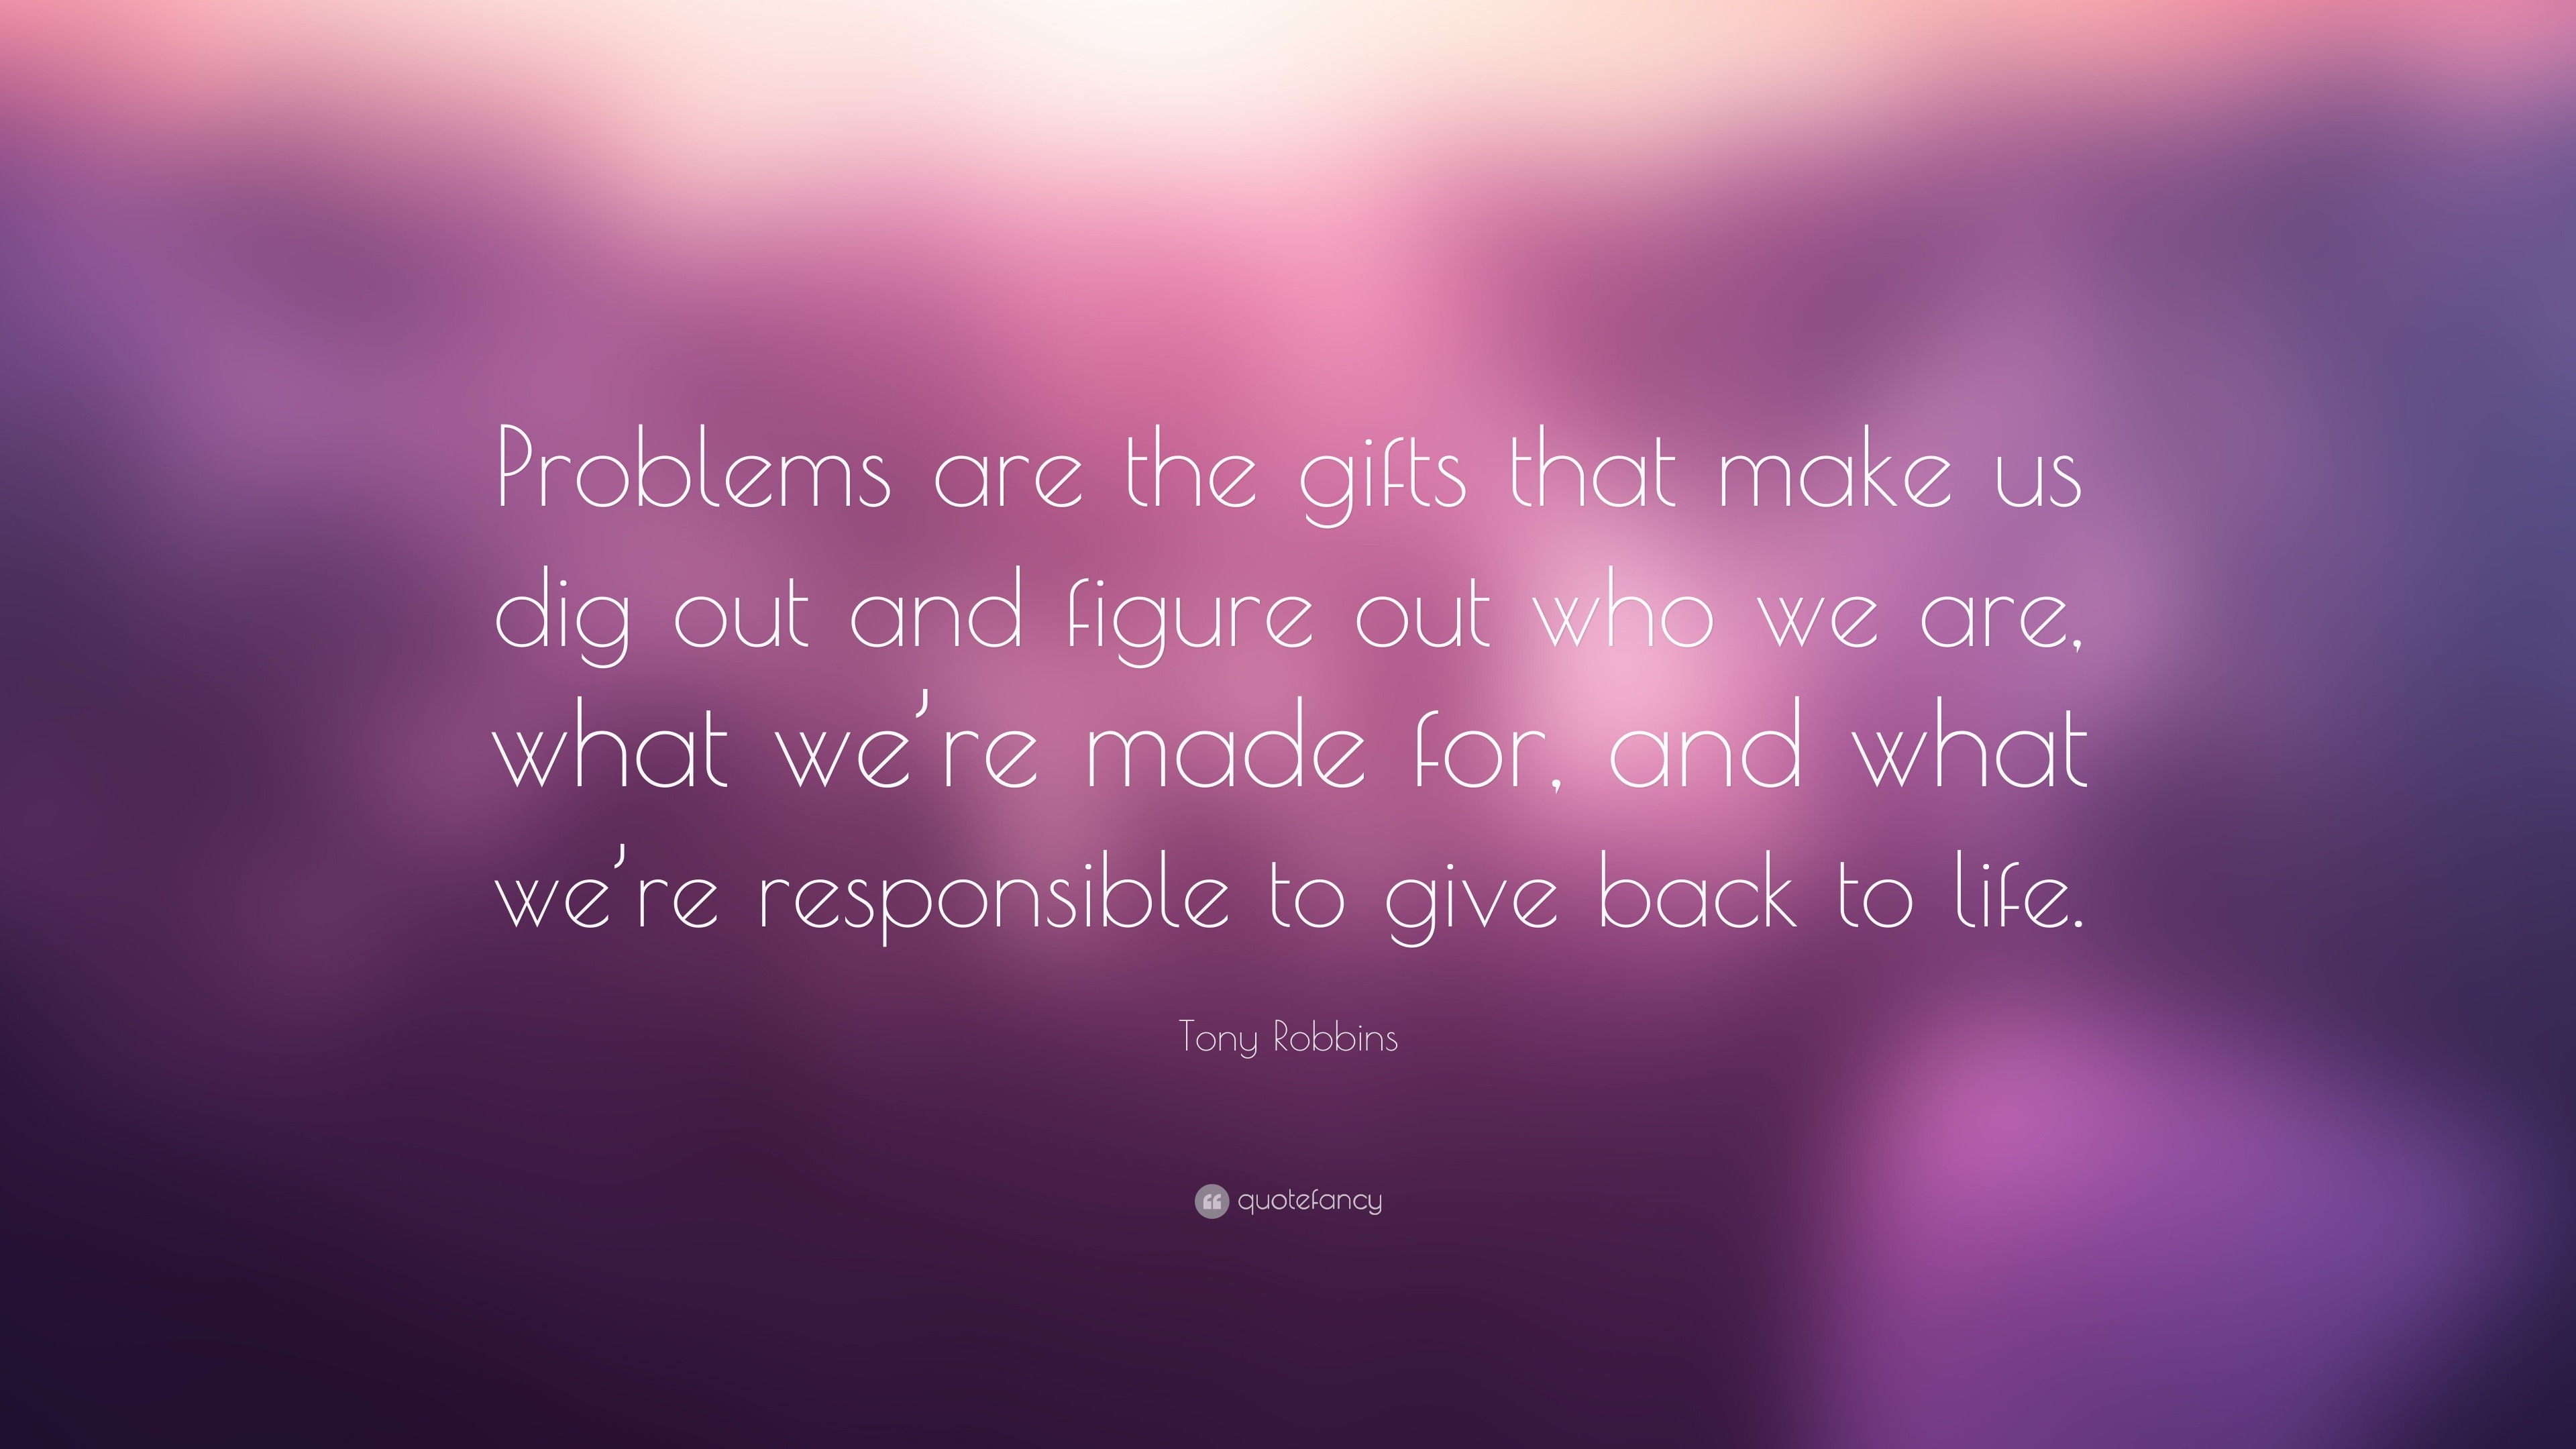 Tony Robbins quote Life is a gift and it offers us the privilege